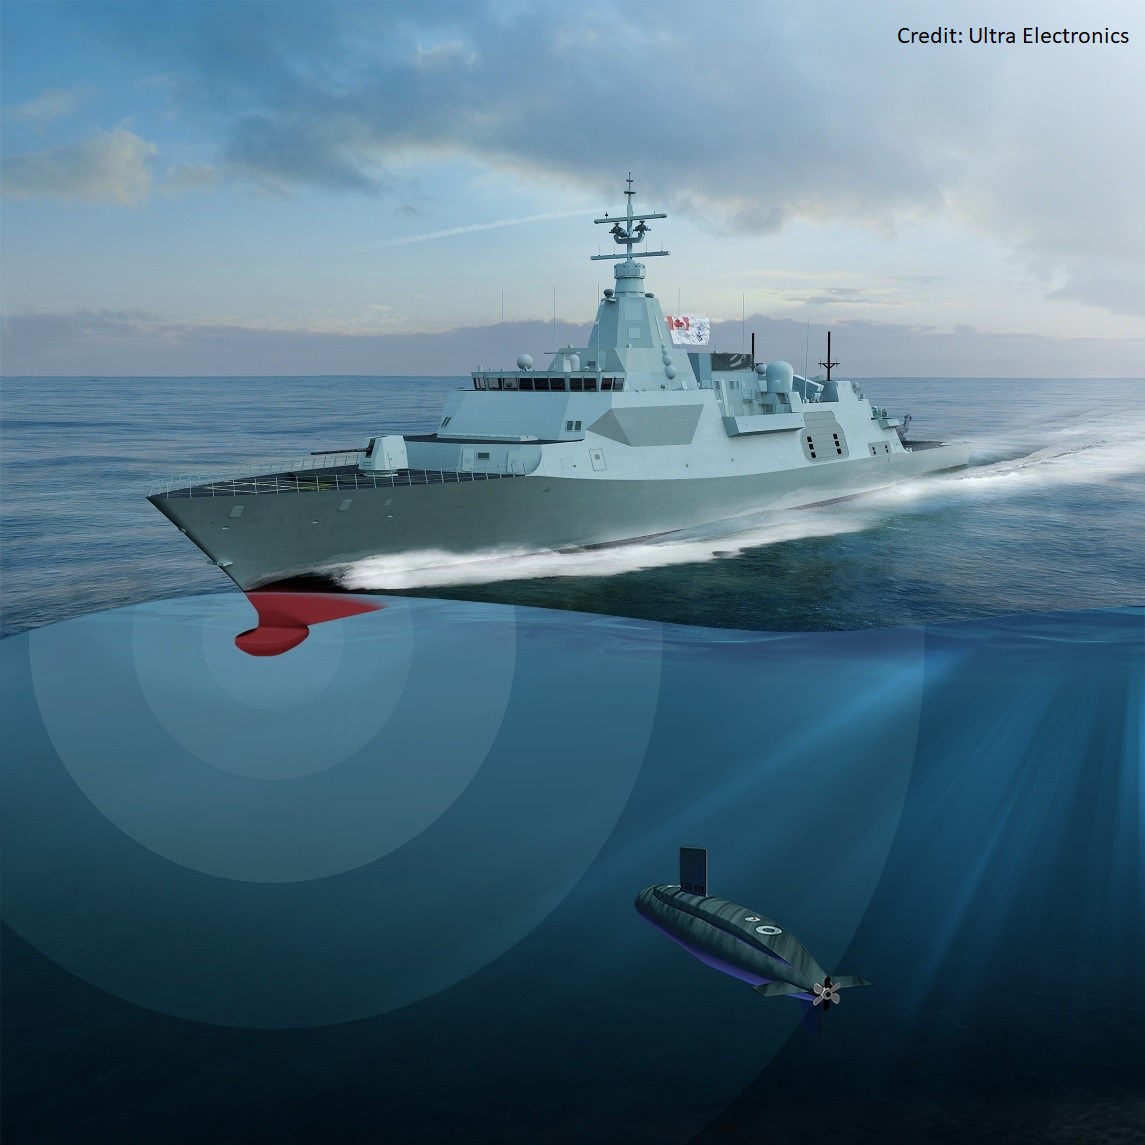 A CGI model of the Canadian Surface Combatant uses its hull-mounted sonar to detect a Kilo-class diesel submarine